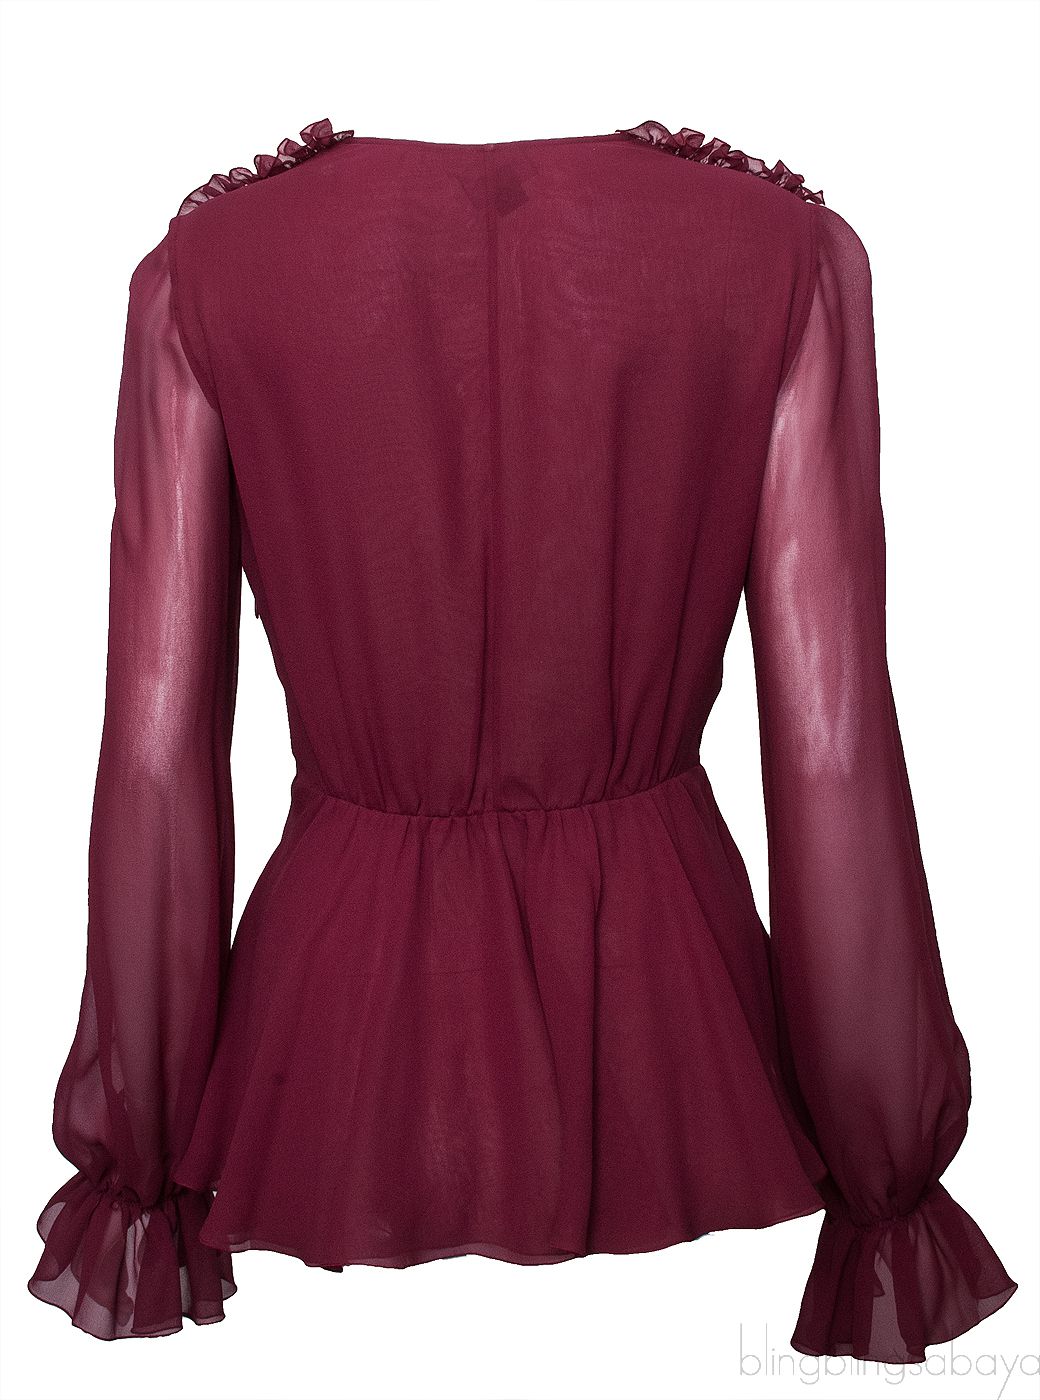 Burgundy Silk Peplum Blouse - Buy & Consign Authentic Pre-Owned Luxury ...